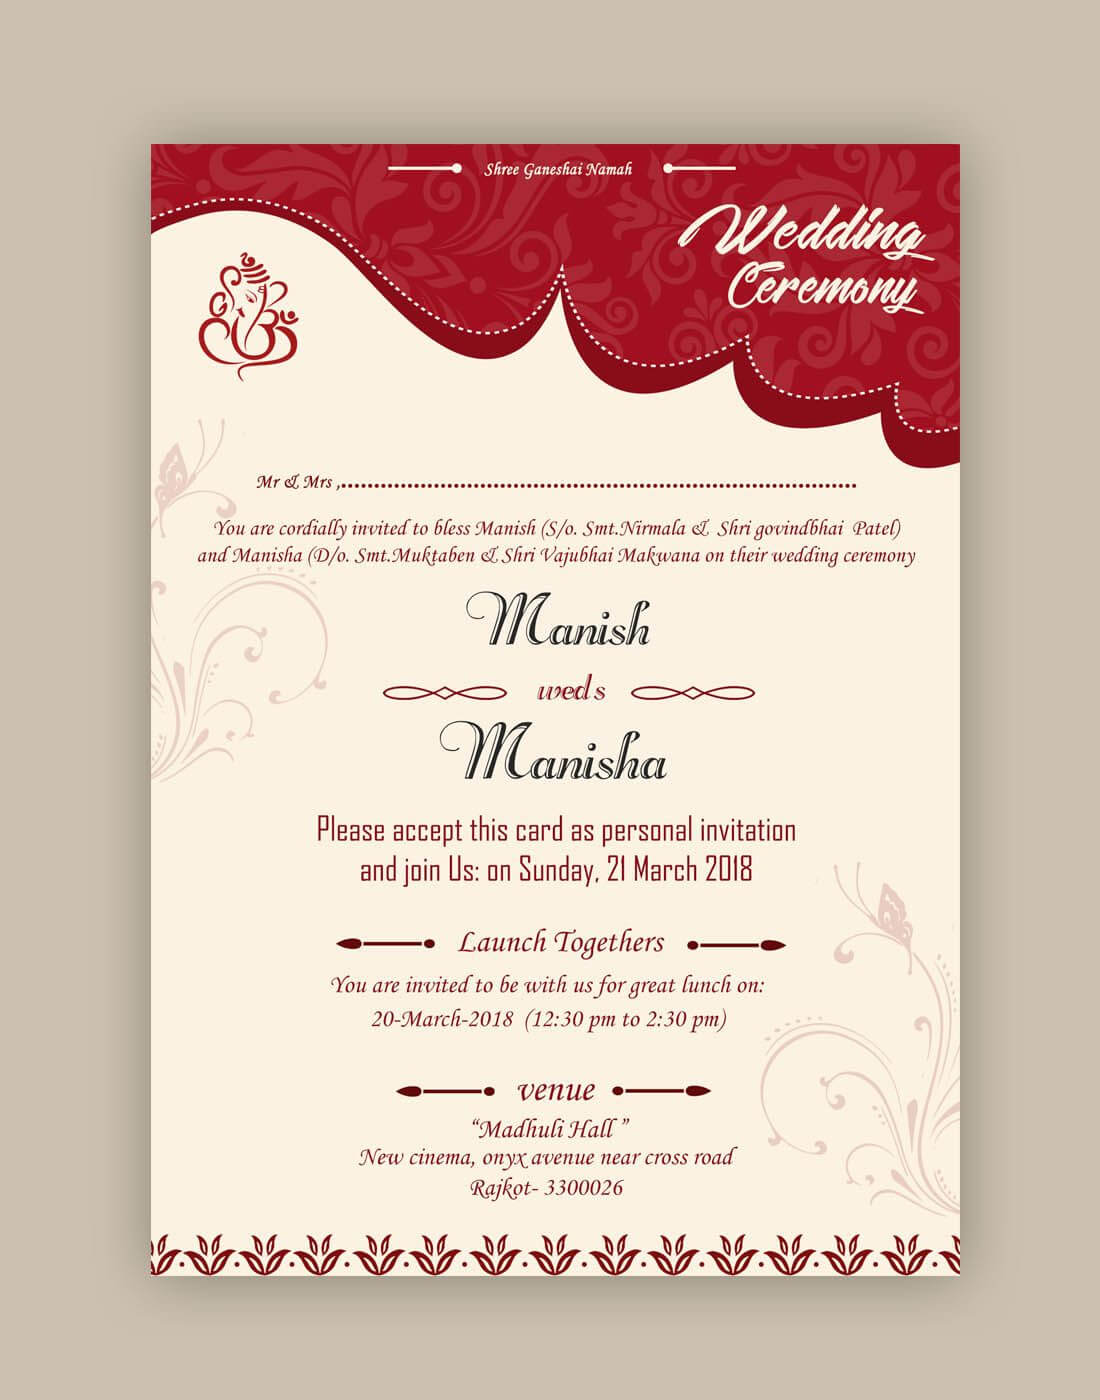 Free Wedding Card Psd Templates In 2020 | Marriage Cards Inside Indian Wedding Cards Design Templates